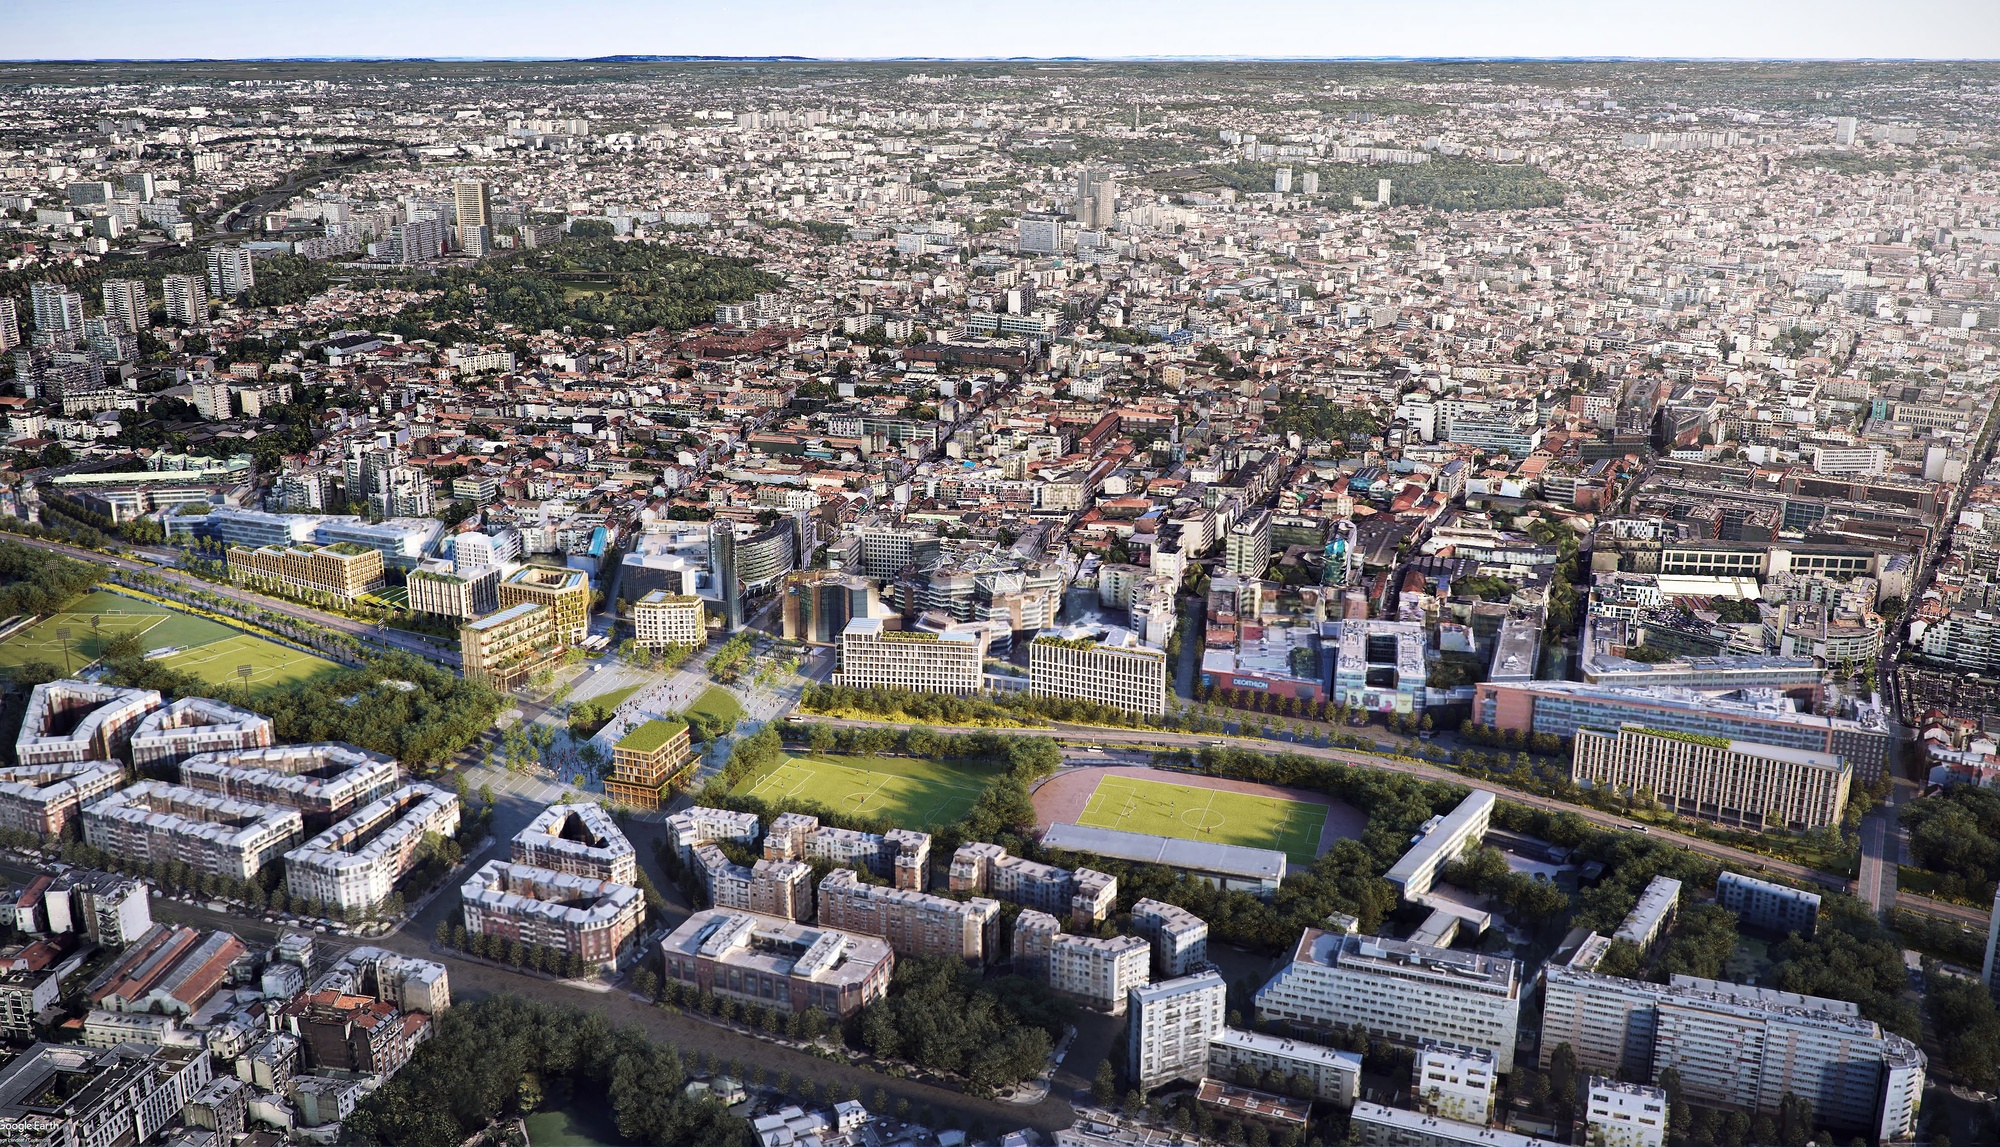 Porte de Montreuil: Reinventing Cities - Projects - Serie Architects